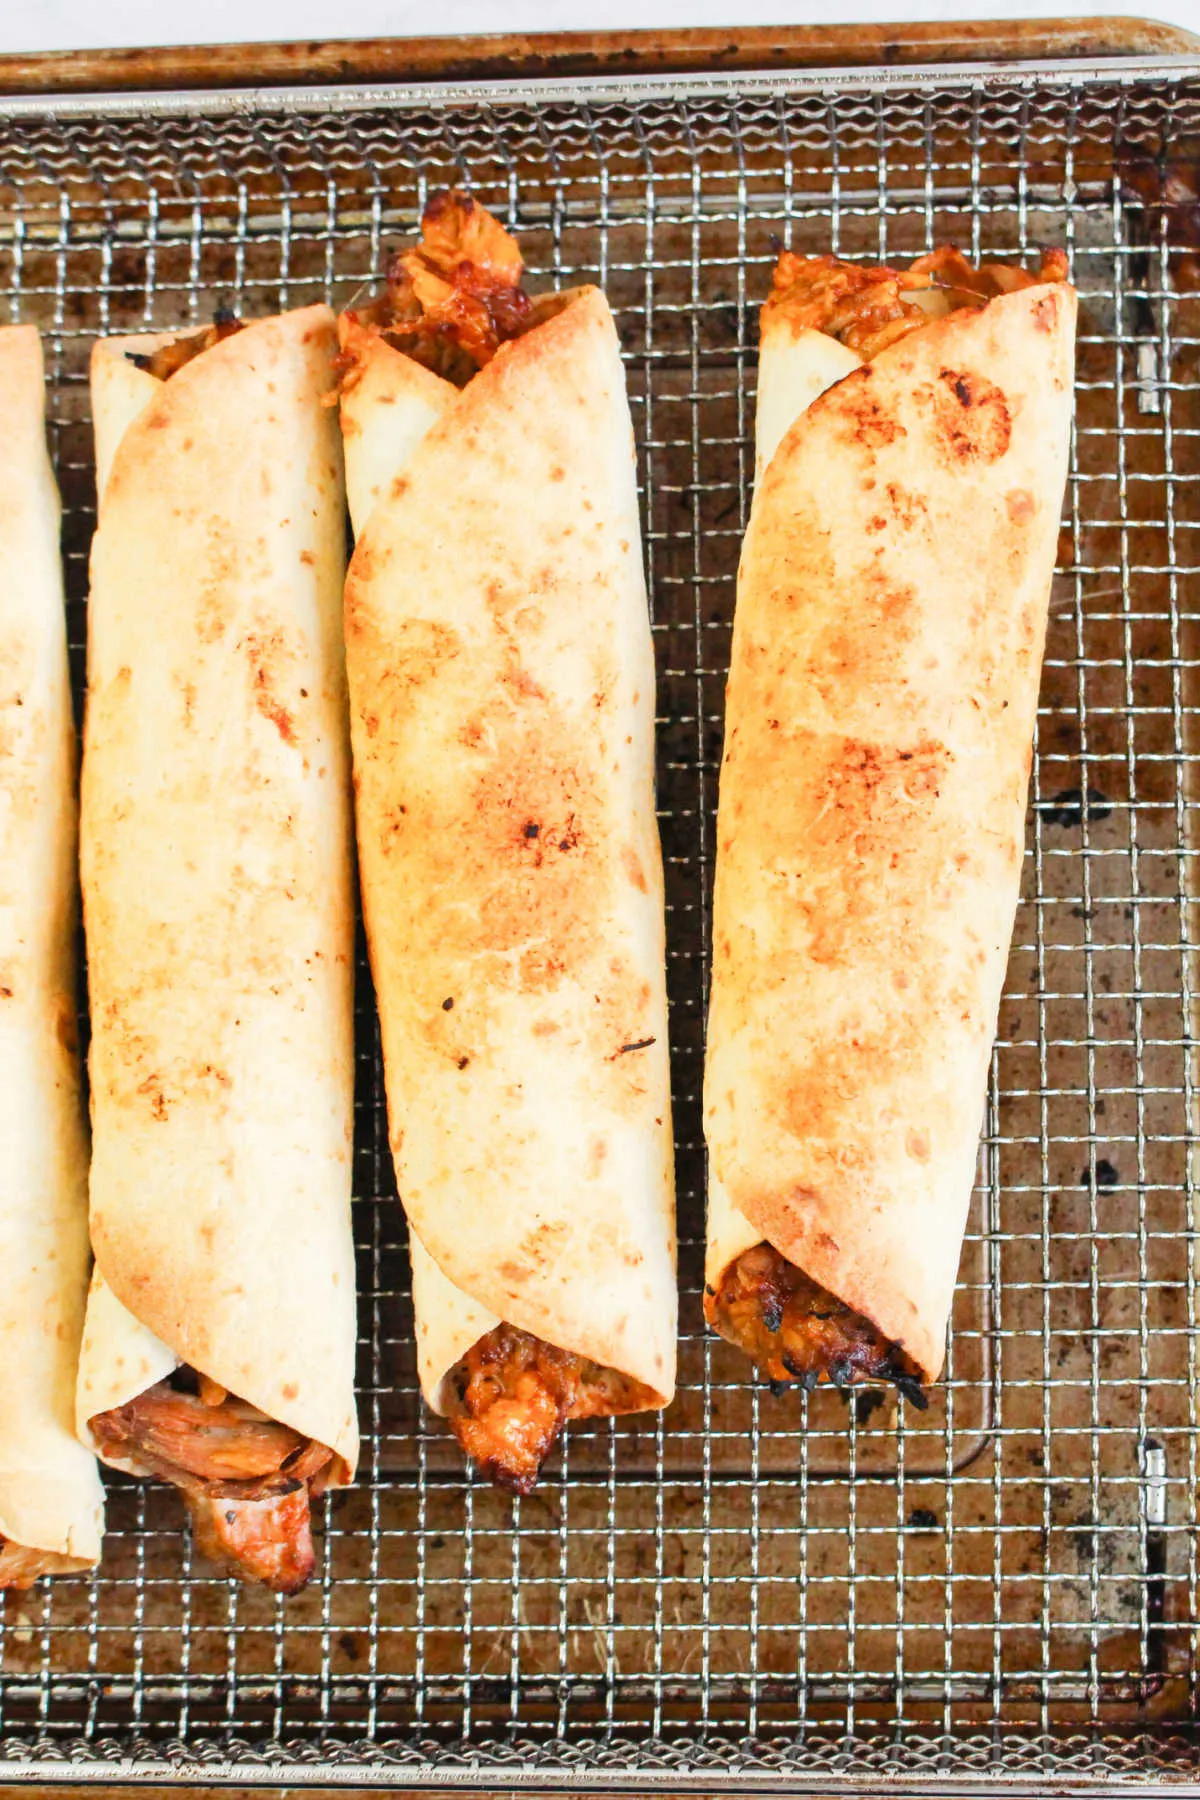 Golden pulled pork taquitos fresh from the air fryer.